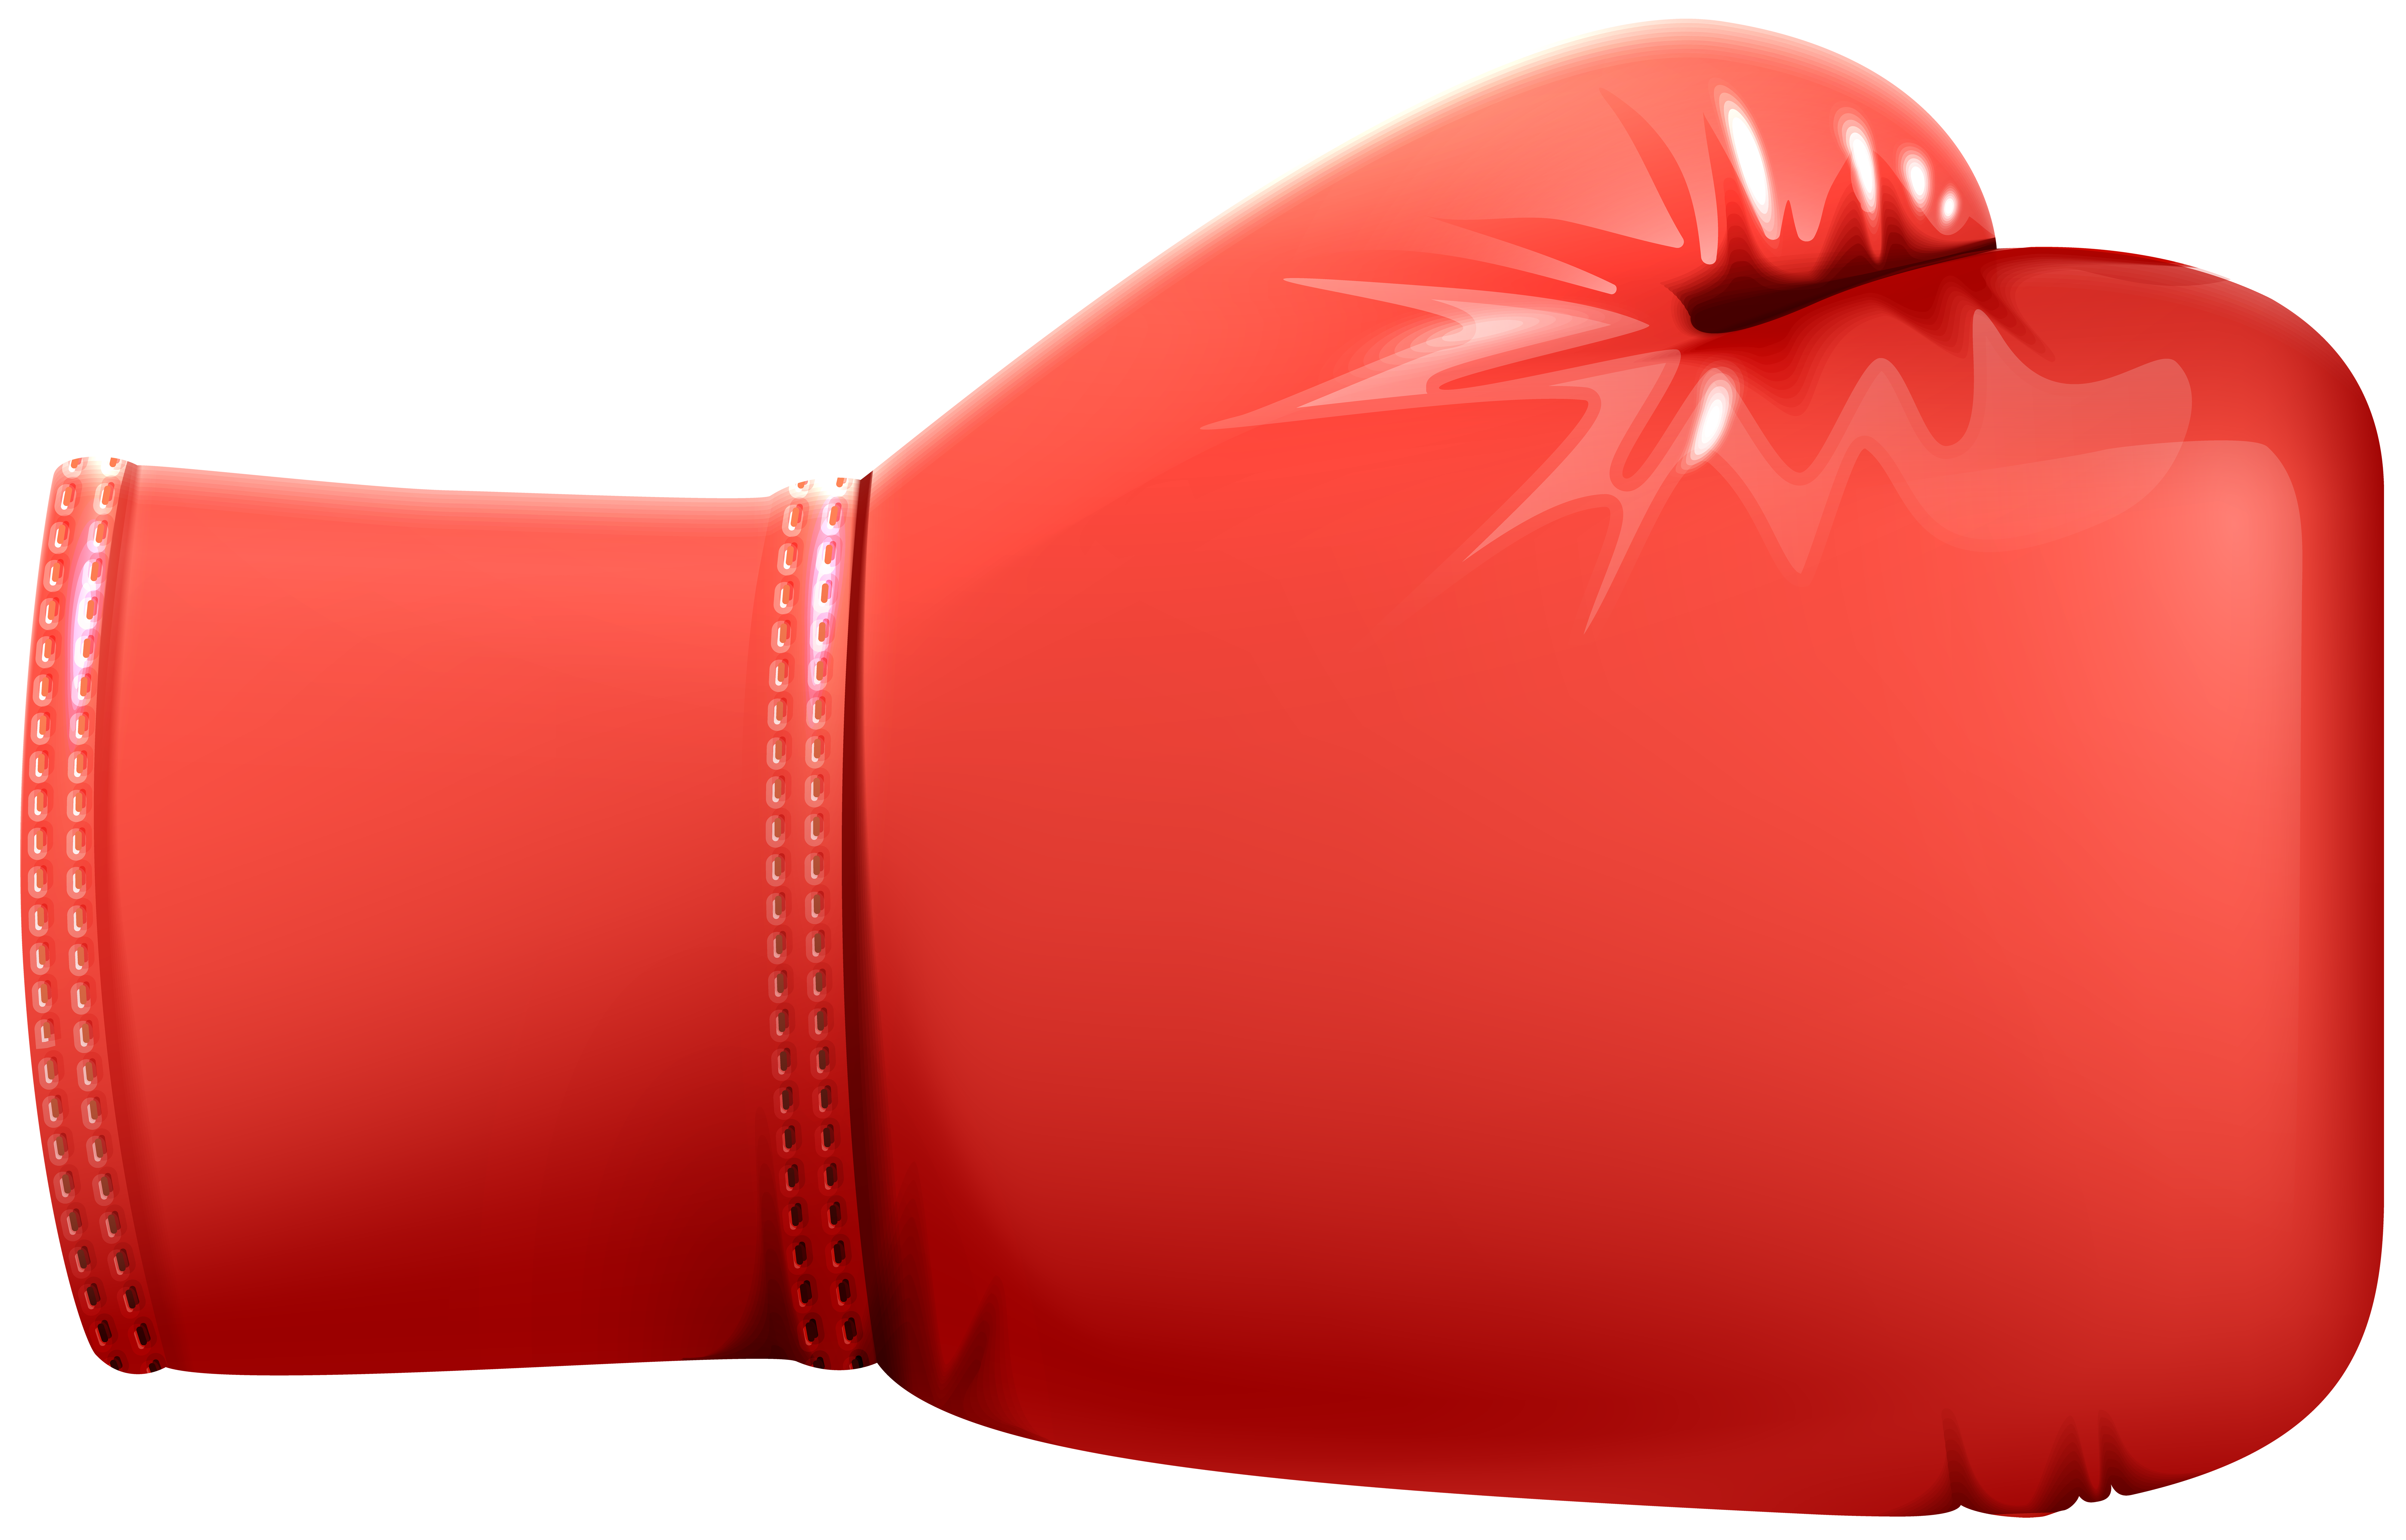 Boxing Gloves Clipart Transparent Background Pngtree provides millions ...